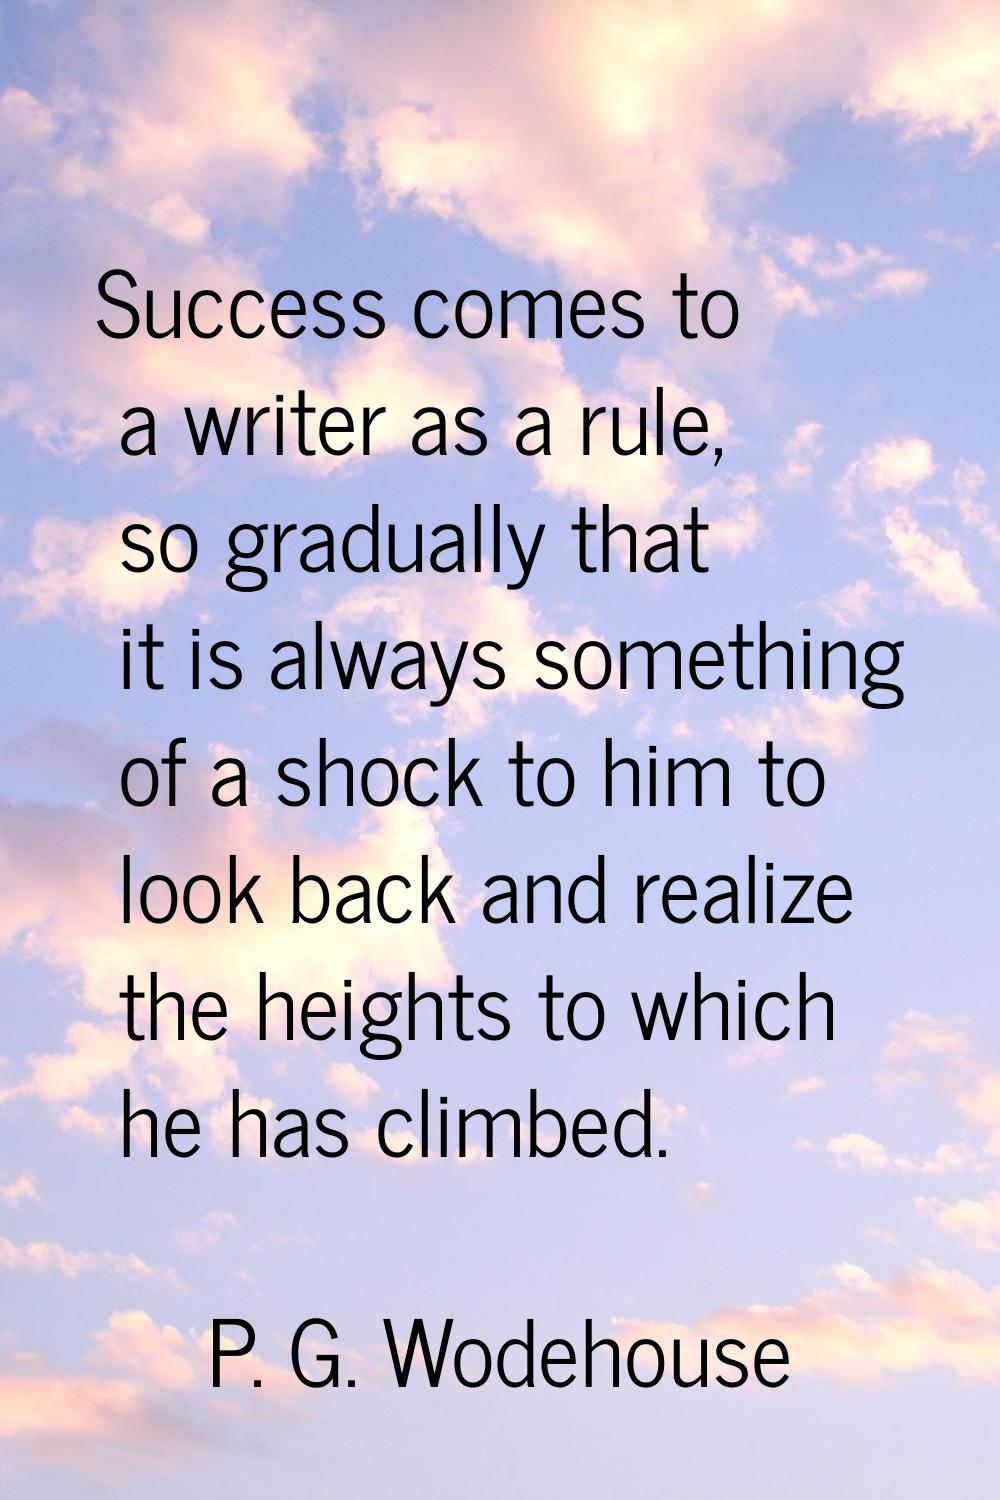 Success comes to a writer as a rule, so gradually that it is always something of a shock to him to 